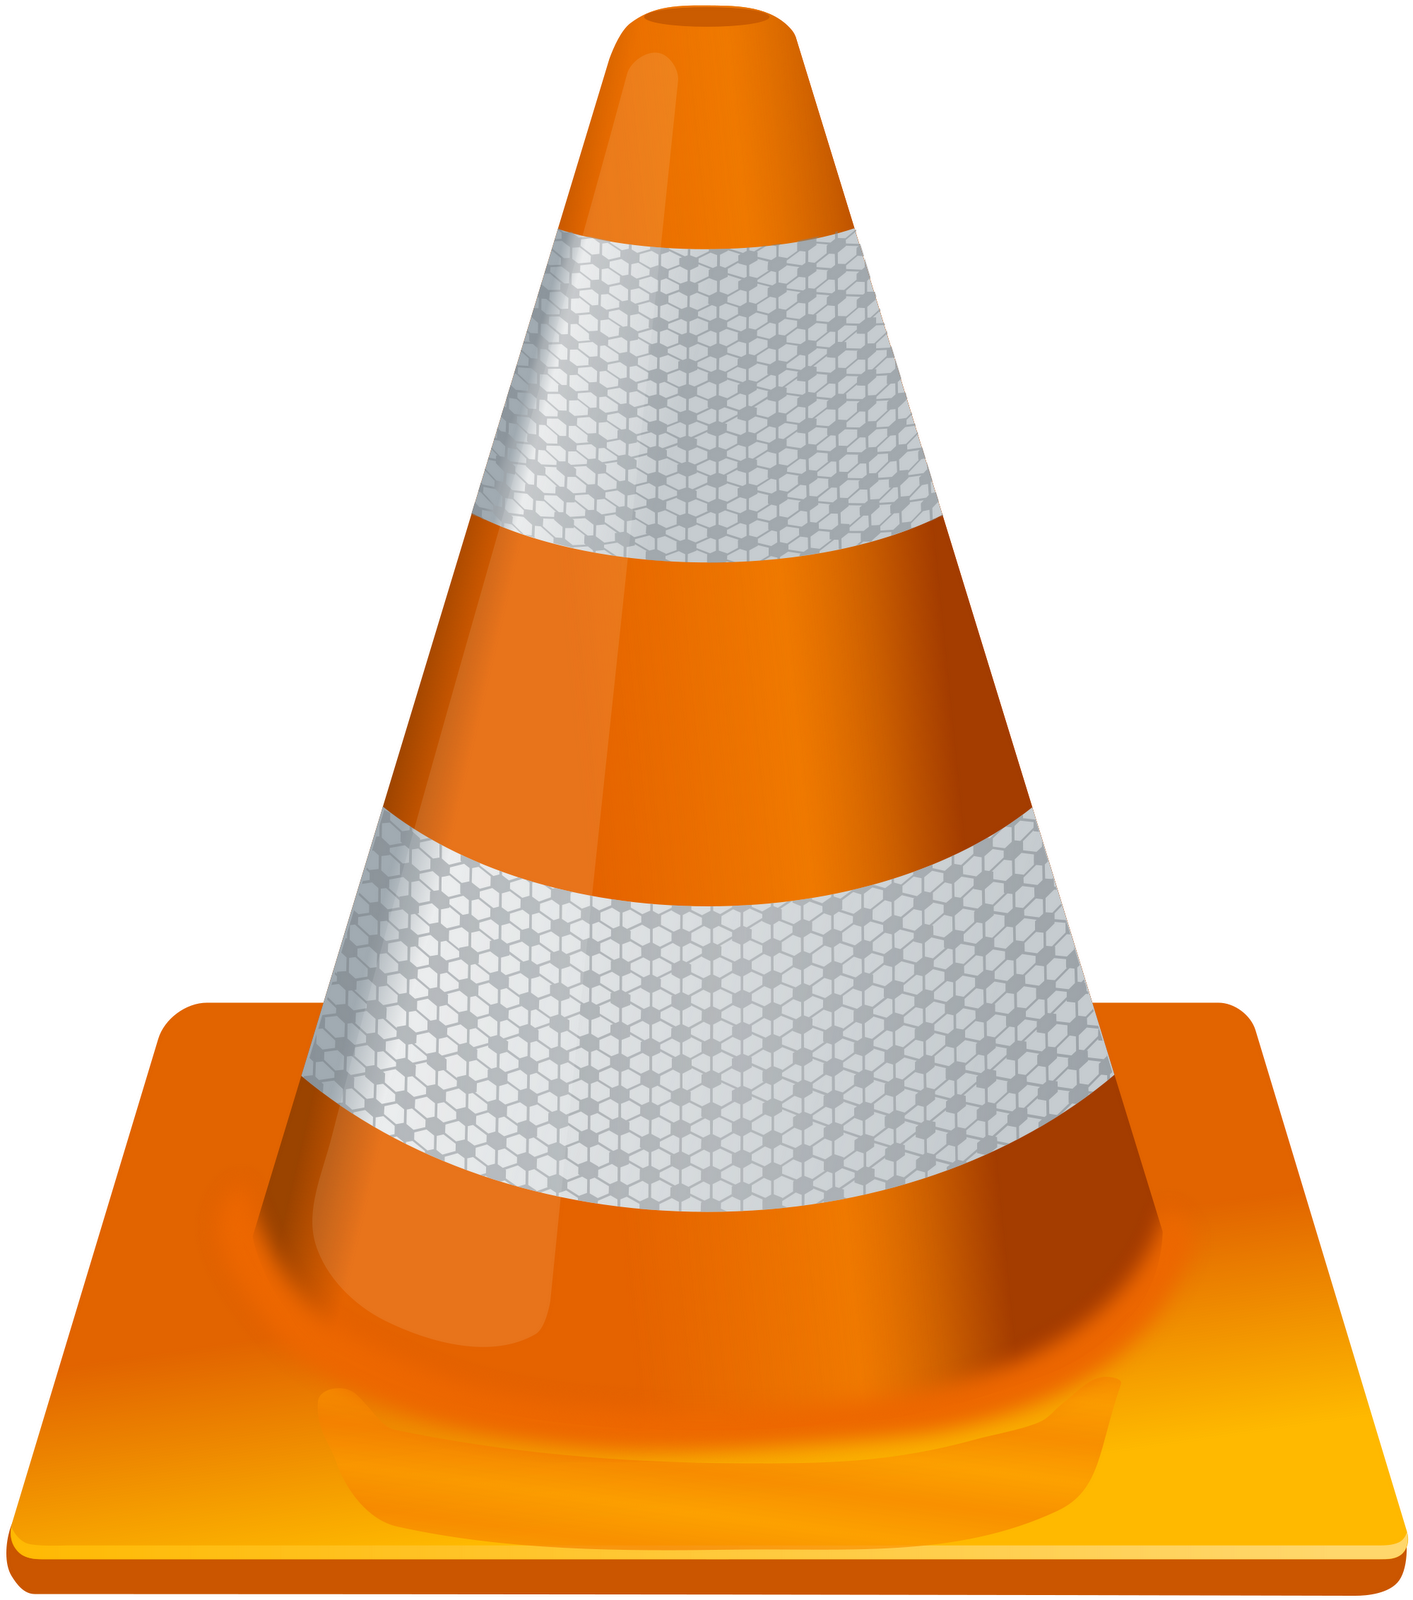 Free Download VLC Media Player 2.1.3 Software or Application Full